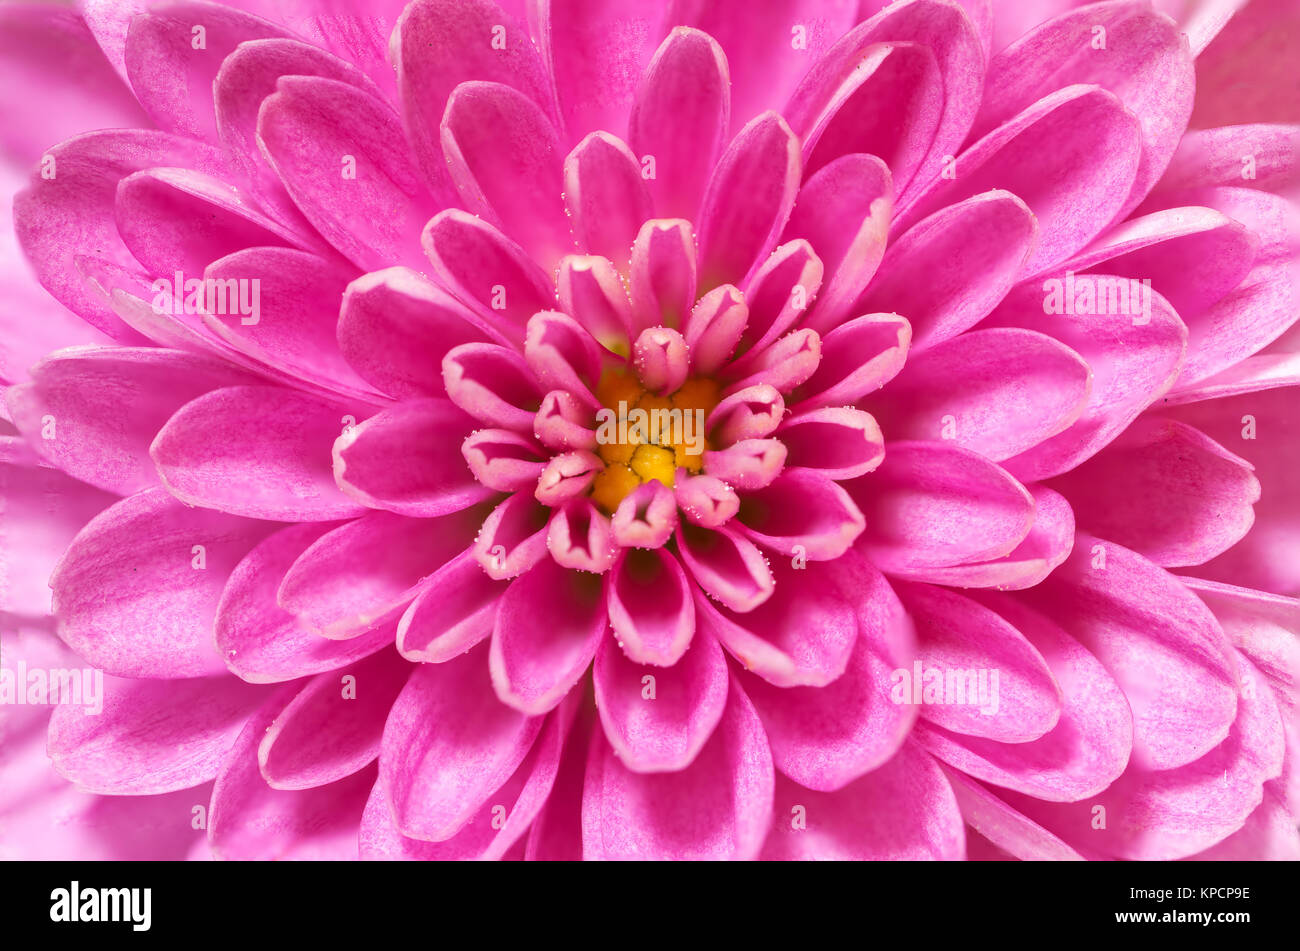 Focus Stacked Chrysanthemum flower center, pink and purple, super macro closeup texture and pattern, petals showing and flower center Stock Photo